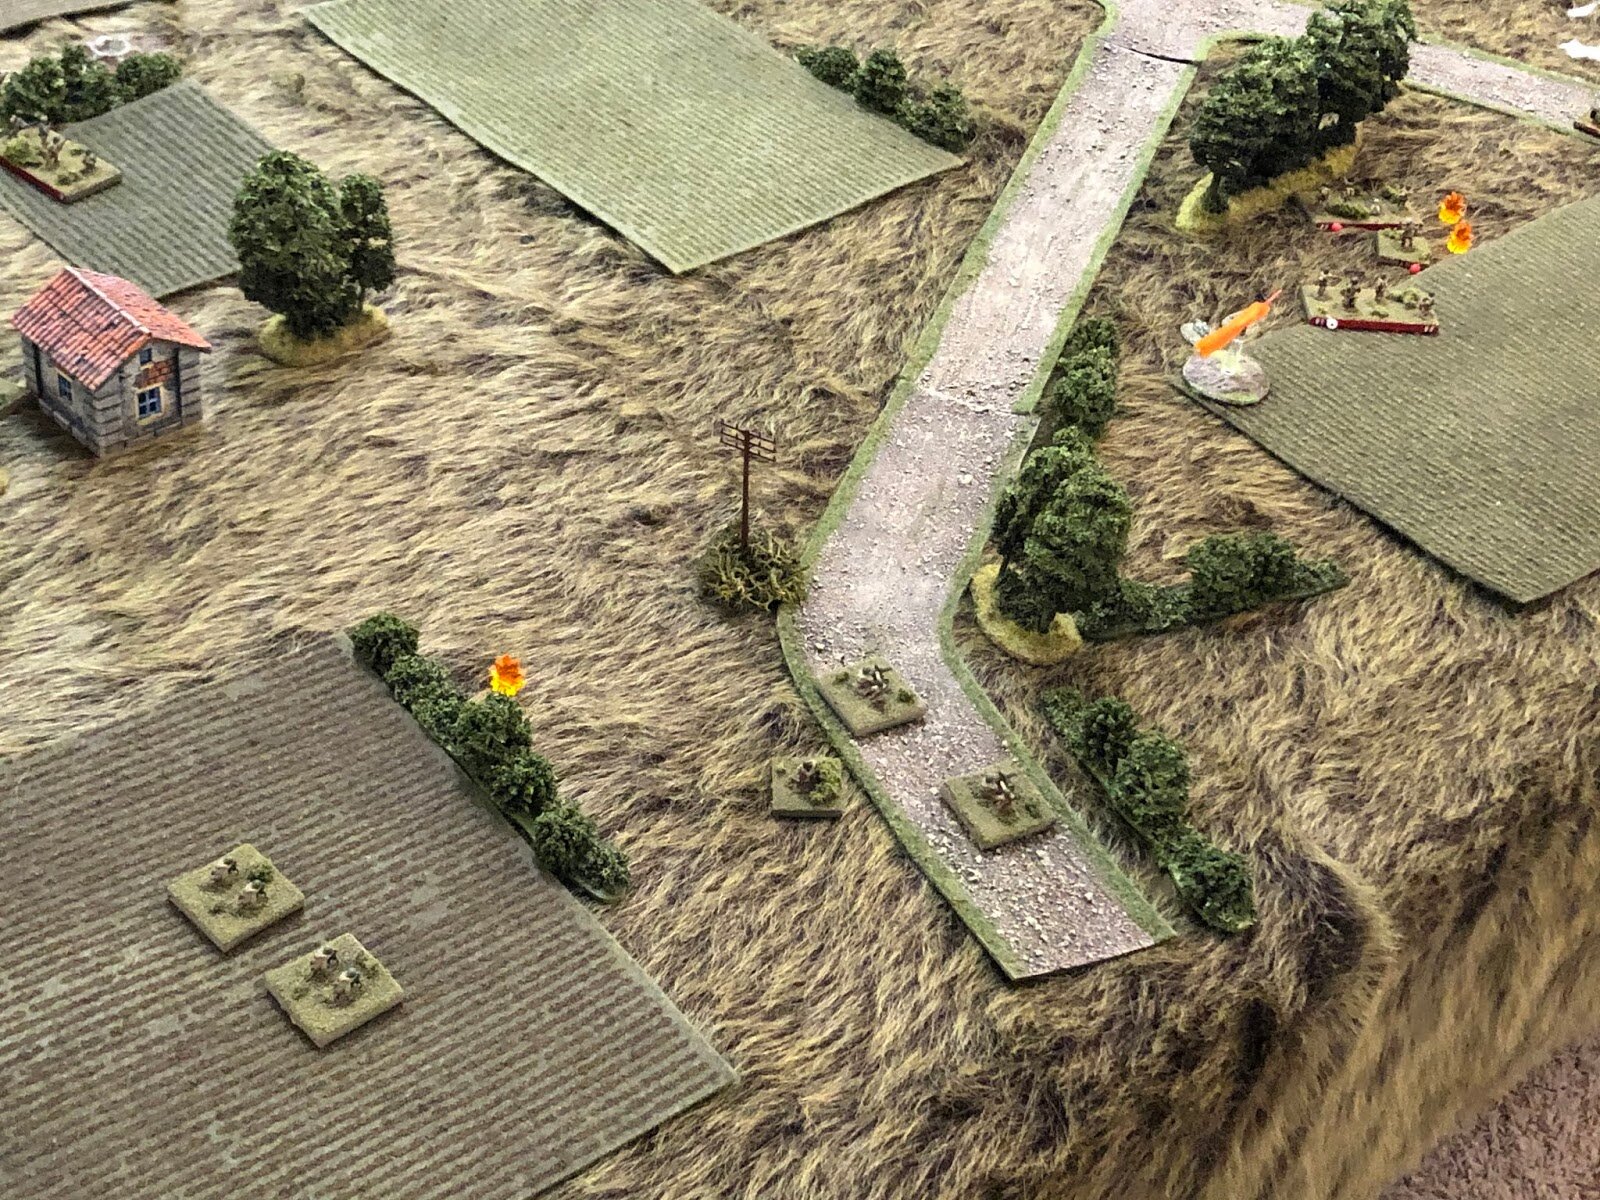  In the southwest, the Soviet light mortars remain in place (bottom left) as their PC leads the two MG teams forward (center bottom), looking to find new hunting ground now that the objective is practically empty and the German halftracks are moving 